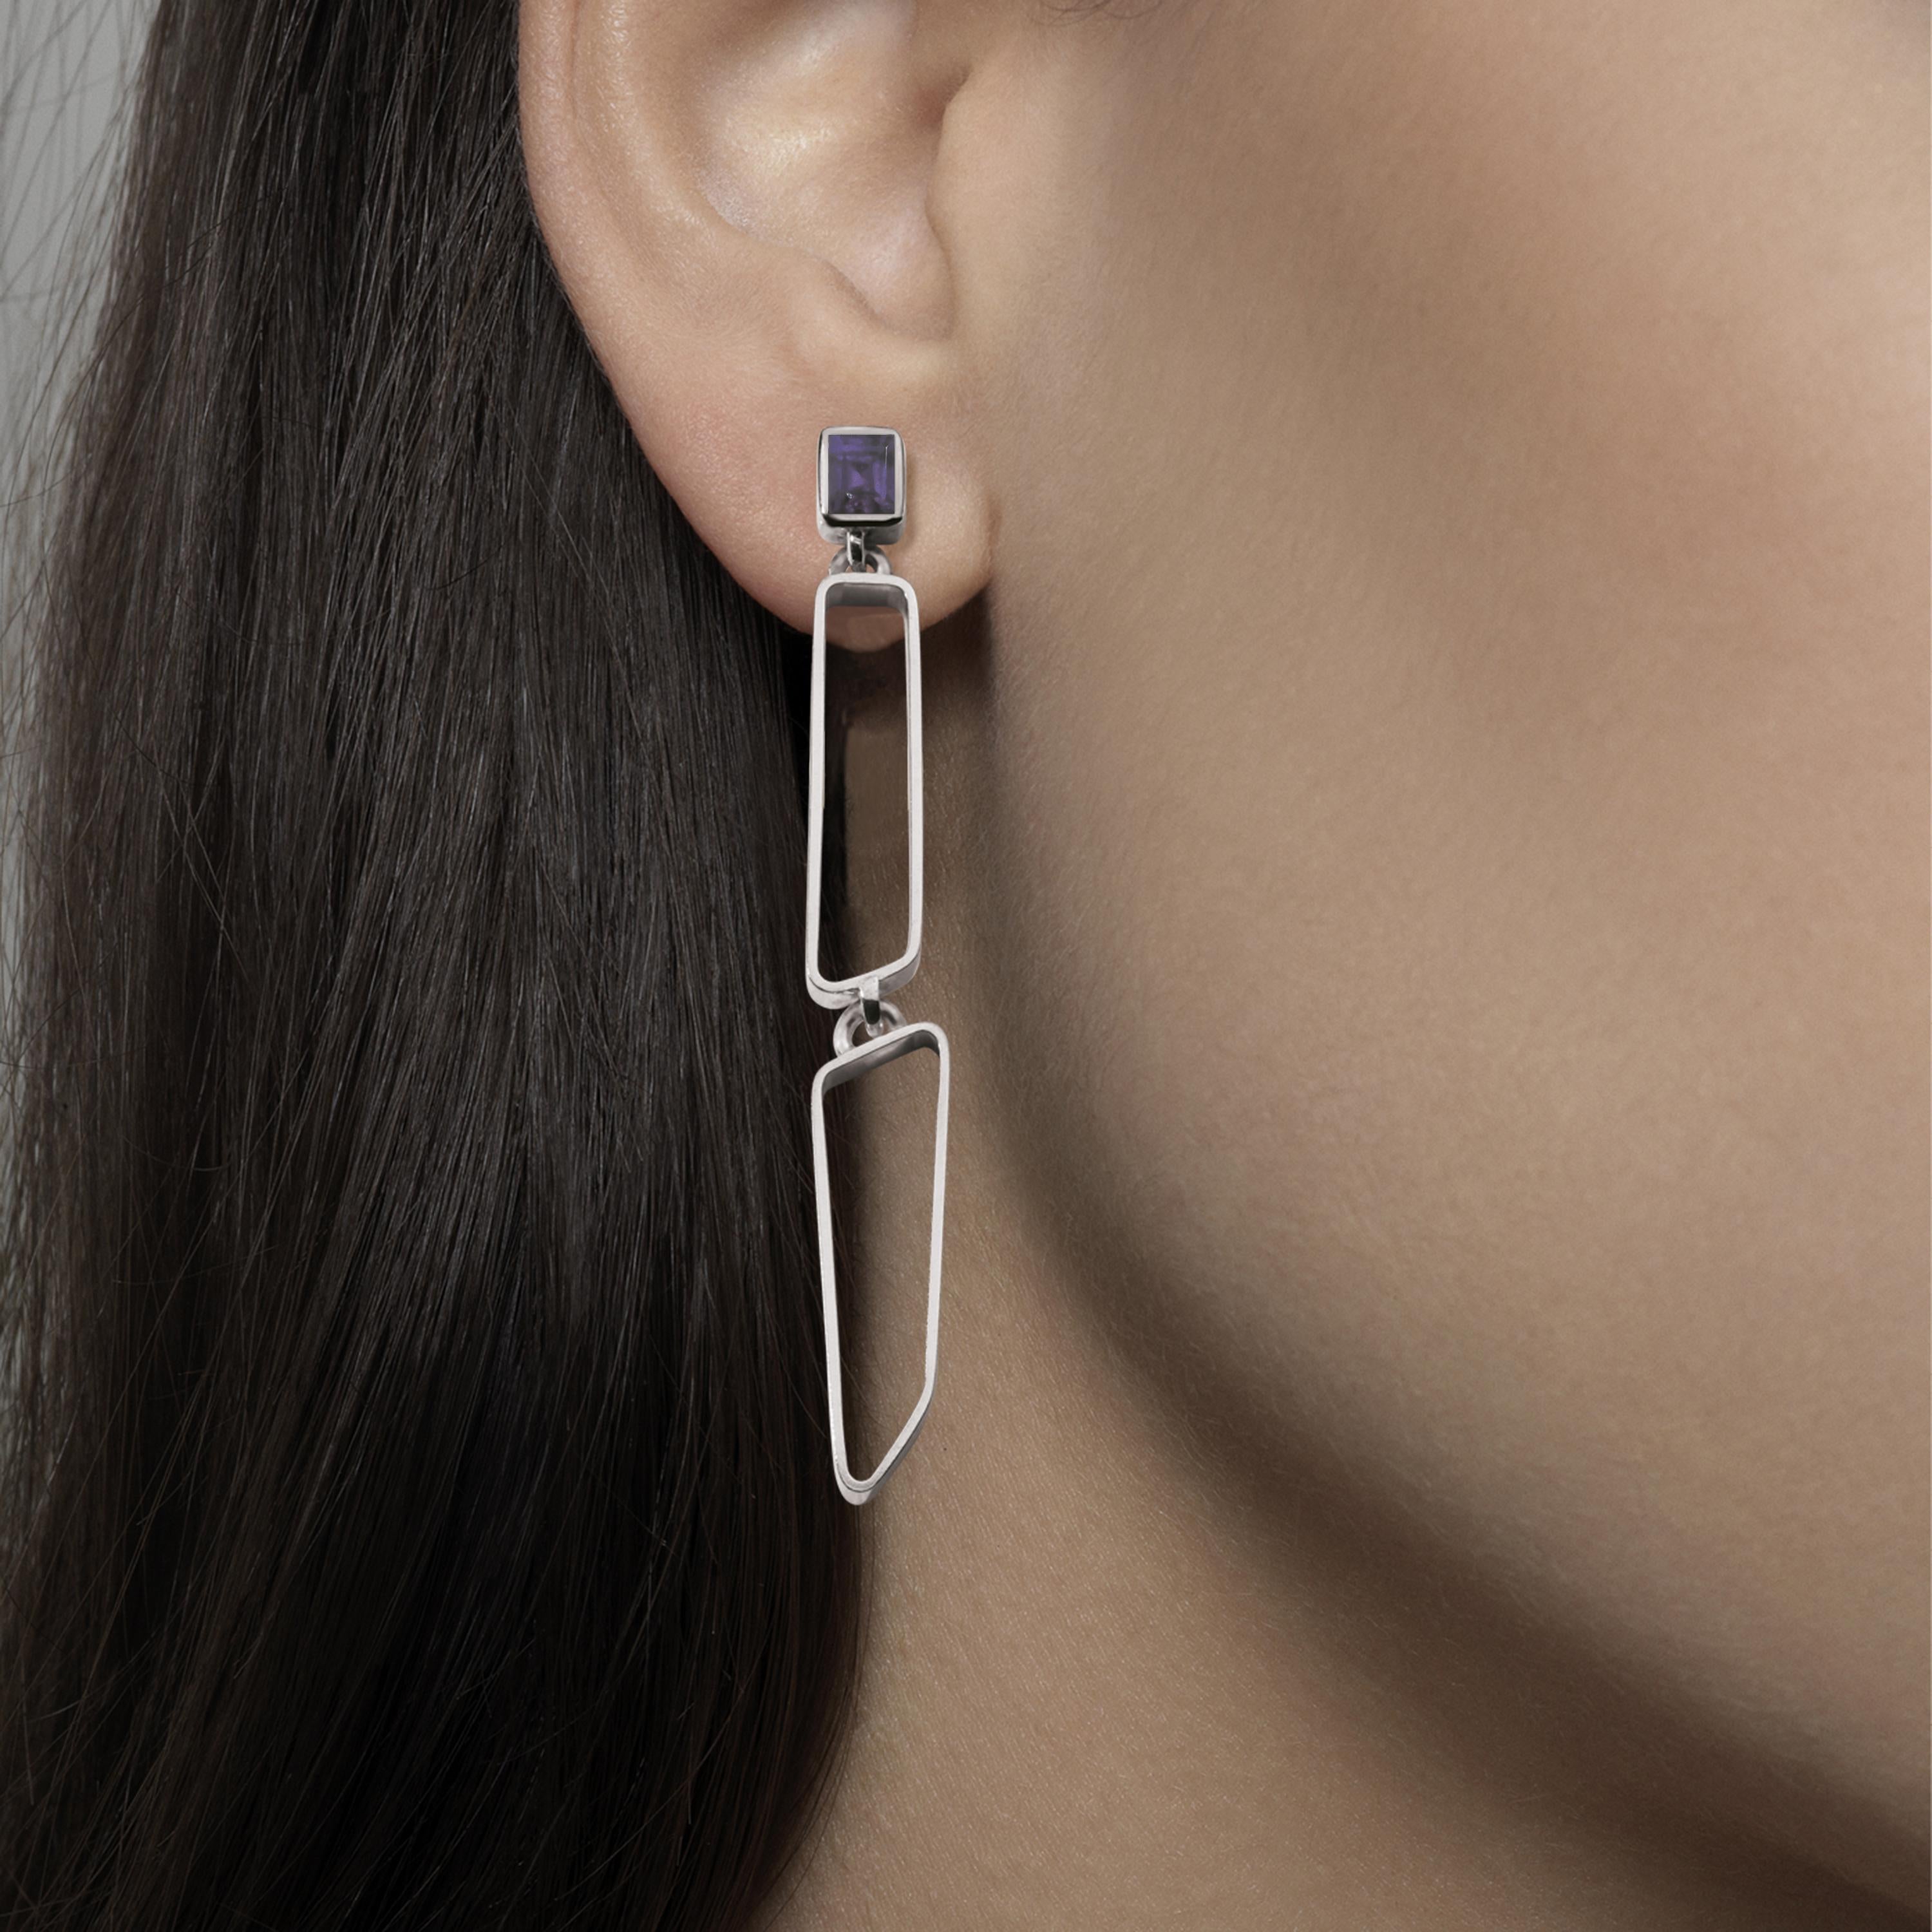 Made by hand in Nathalie Jean's Milan atelier in limited edition, the Saphir Infini Double drop dangle Earrings are in iolite and sterling silver ribbon shapes with rounded edges. The angular configurations of the sapphire’s crystalline structure